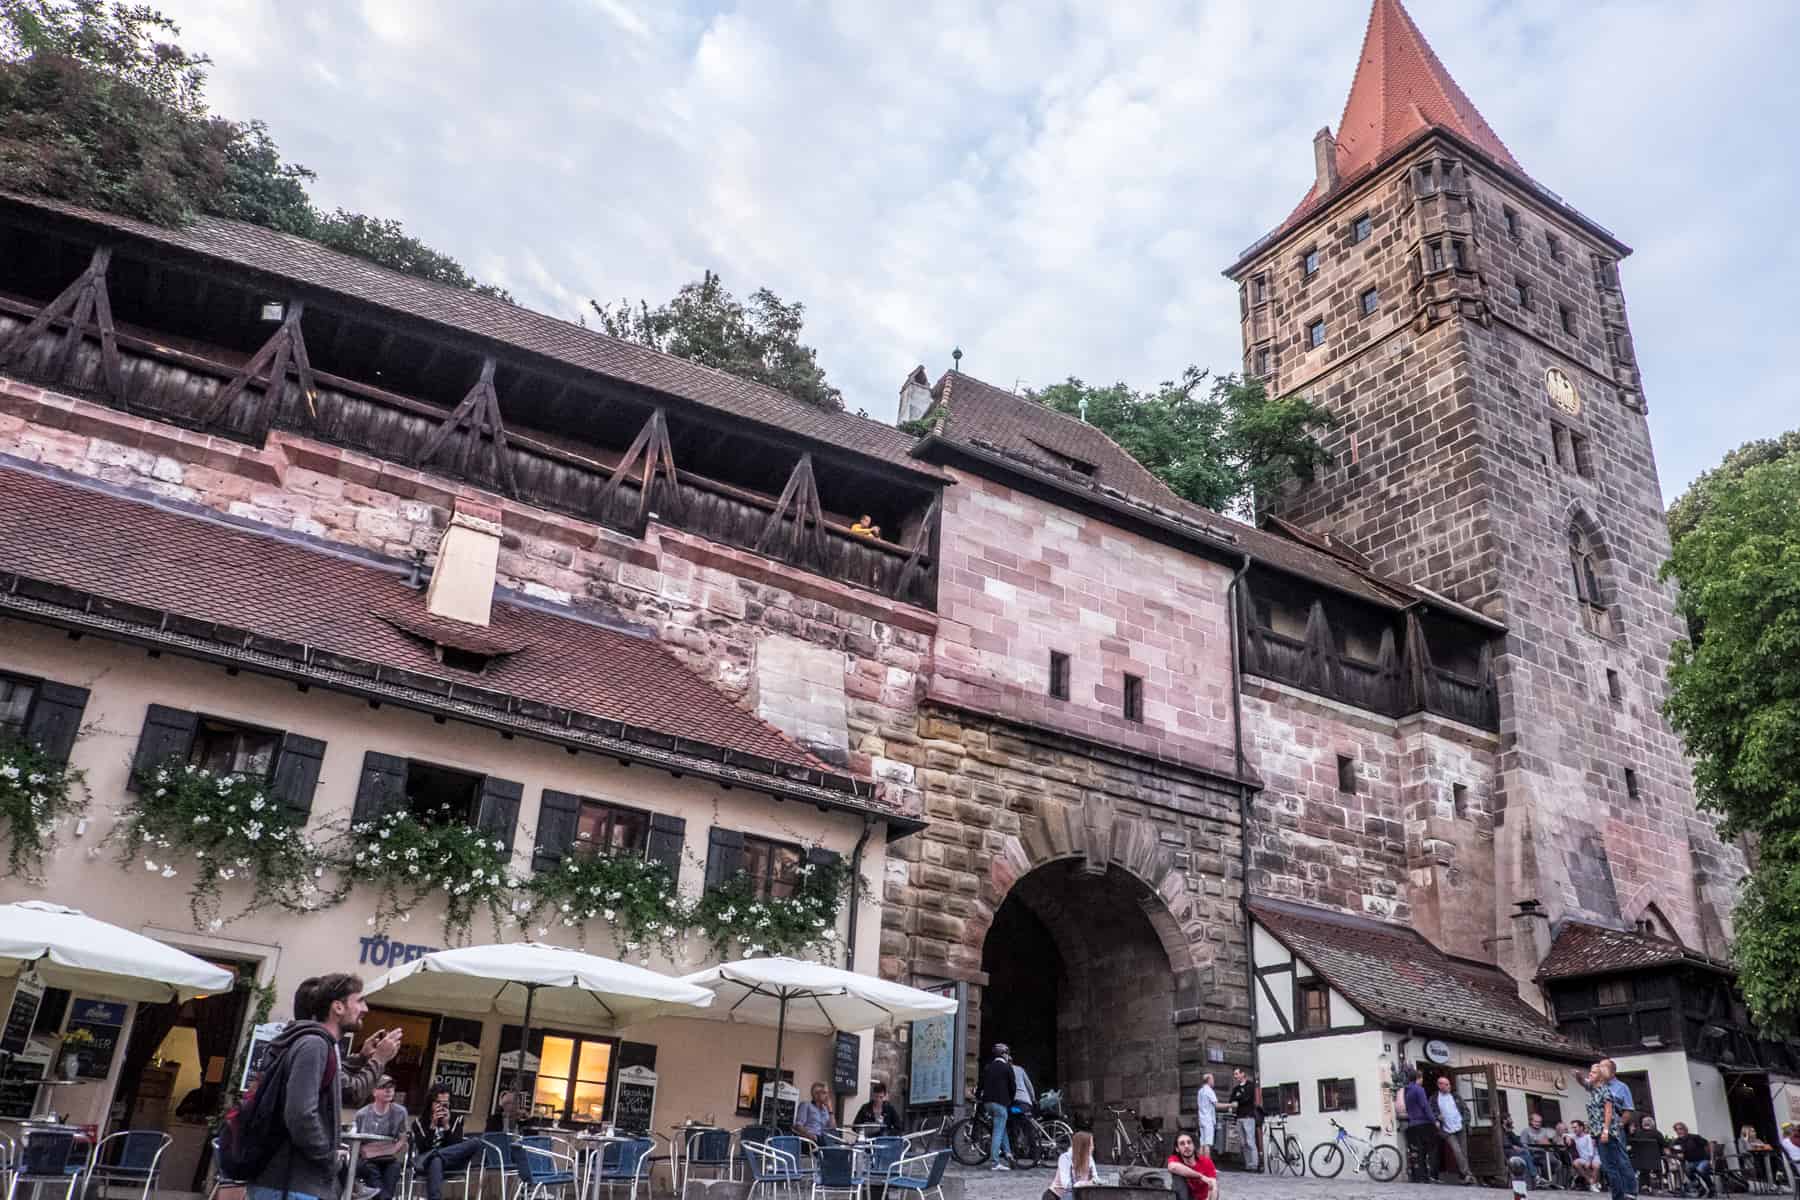 View of Nuremberg Castle entrance marked by an arched tunnel and a single tower old town, with people gathering outside at one of the ground-level bars